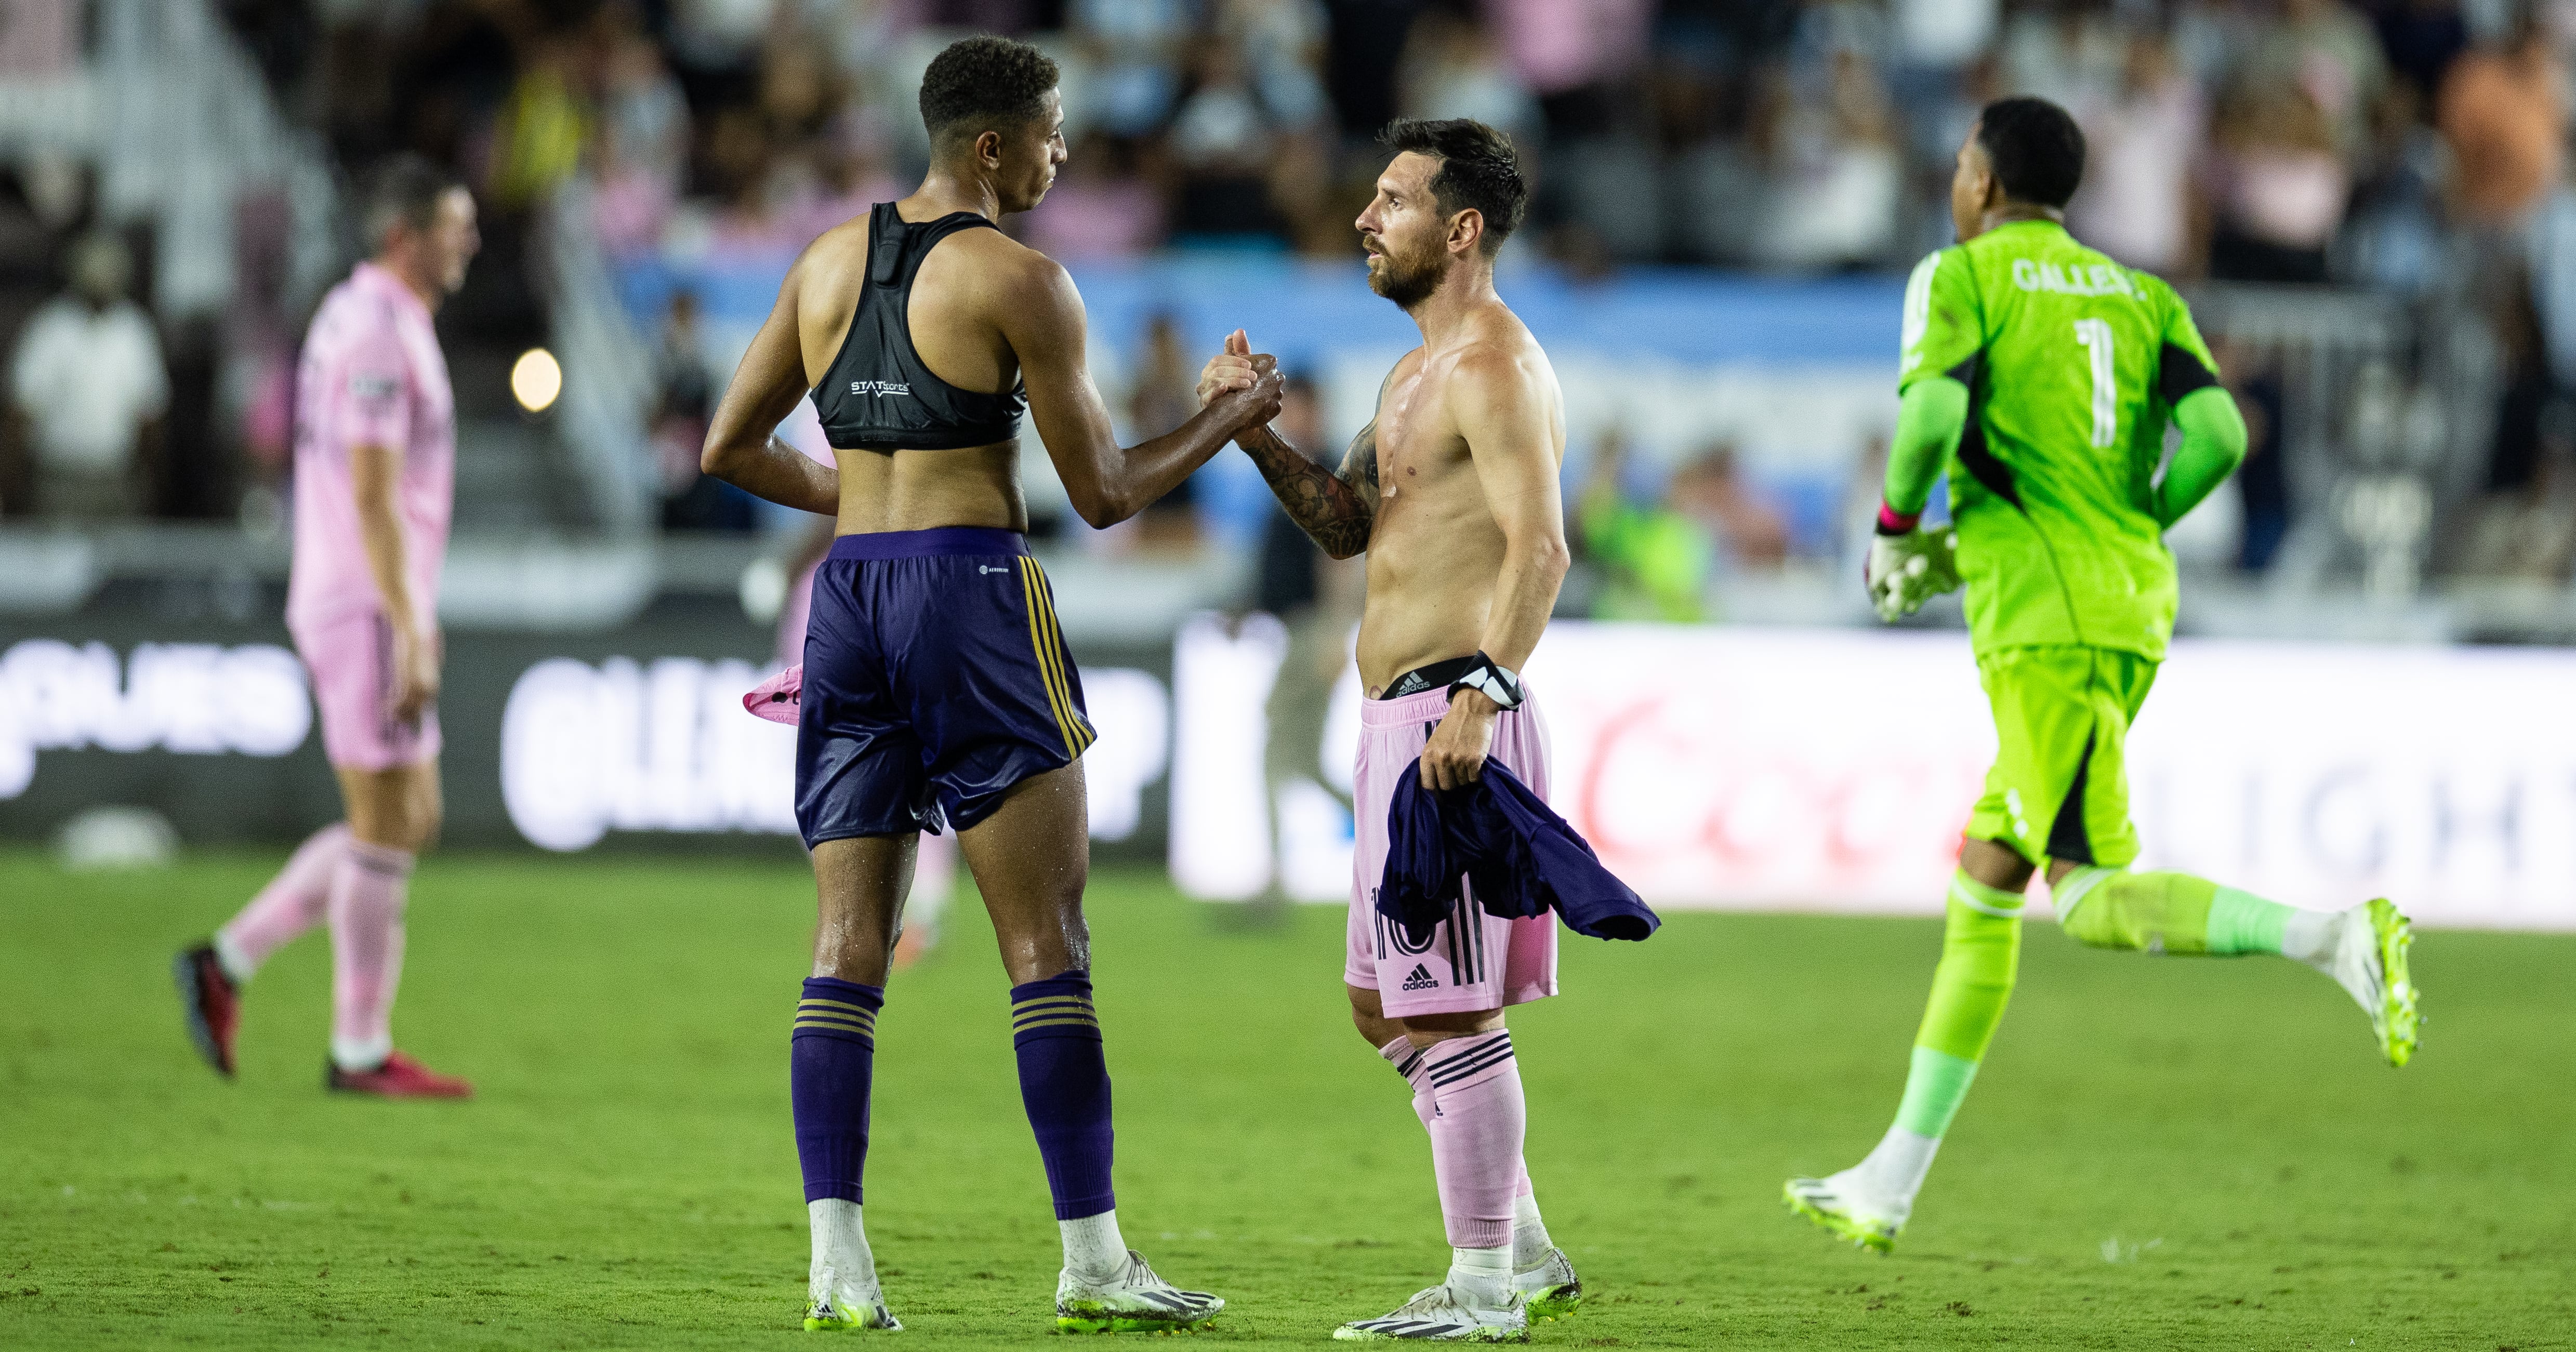 Why do male footballers suddenly need to wear bras?